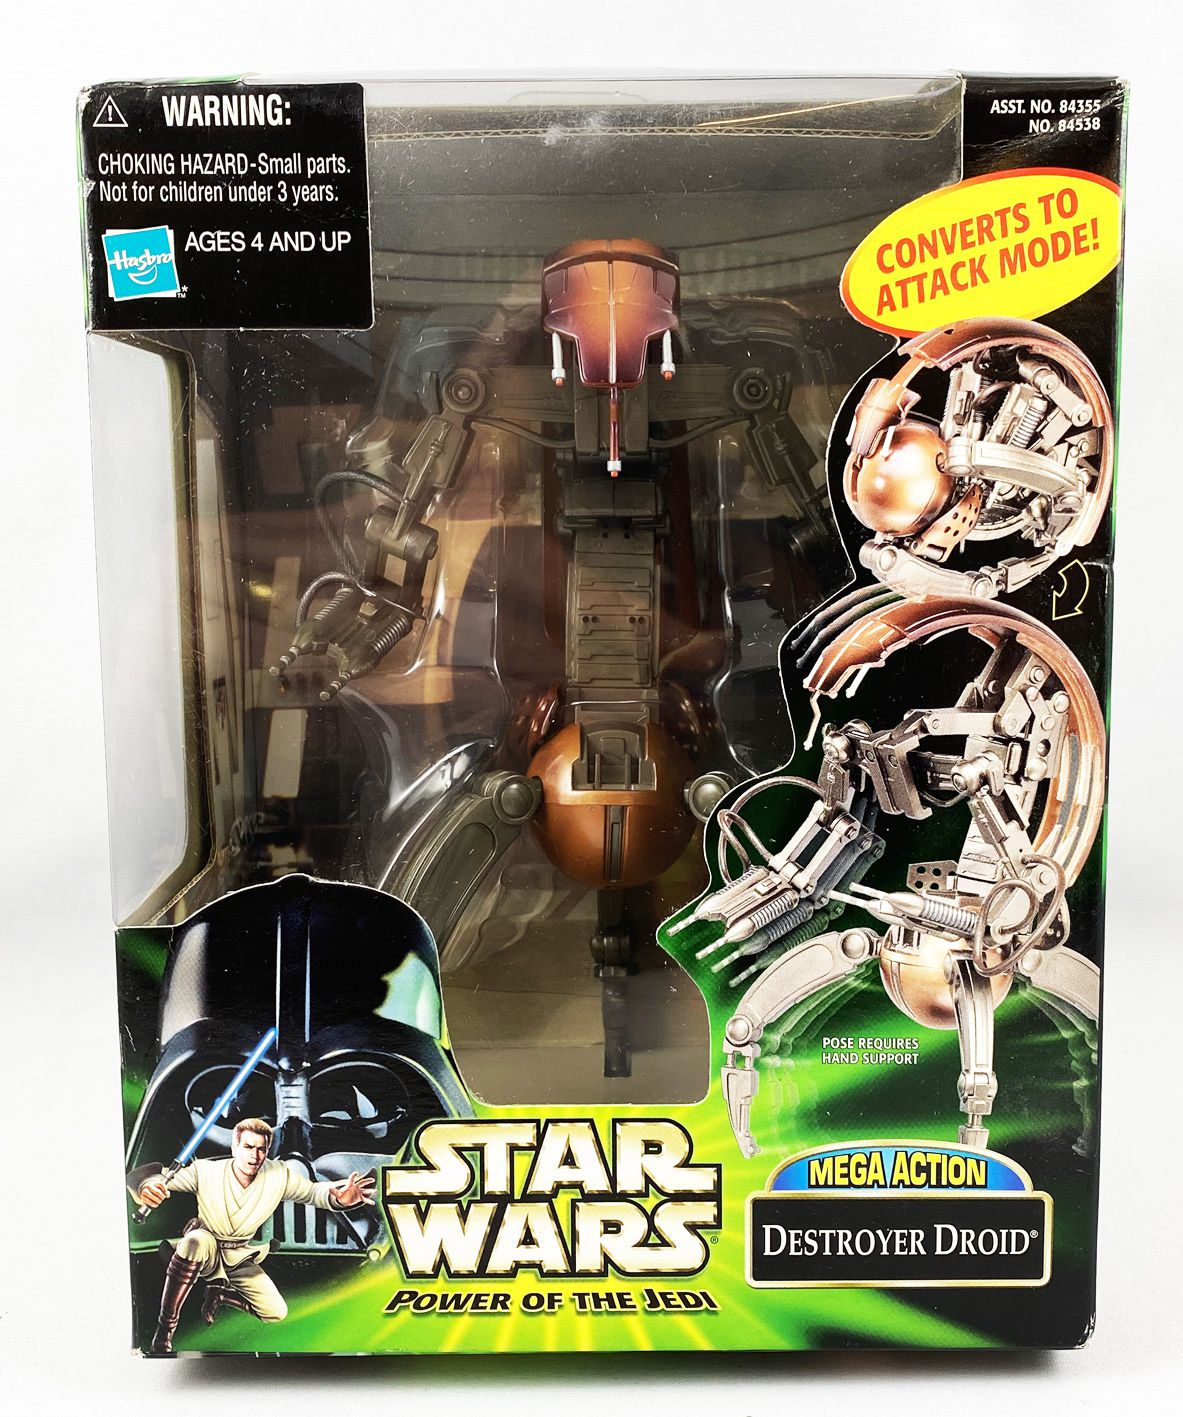 2000 Hasbro Star Wars Destroyer Droid Power of The Jedi Mega Action R12 for sale online 